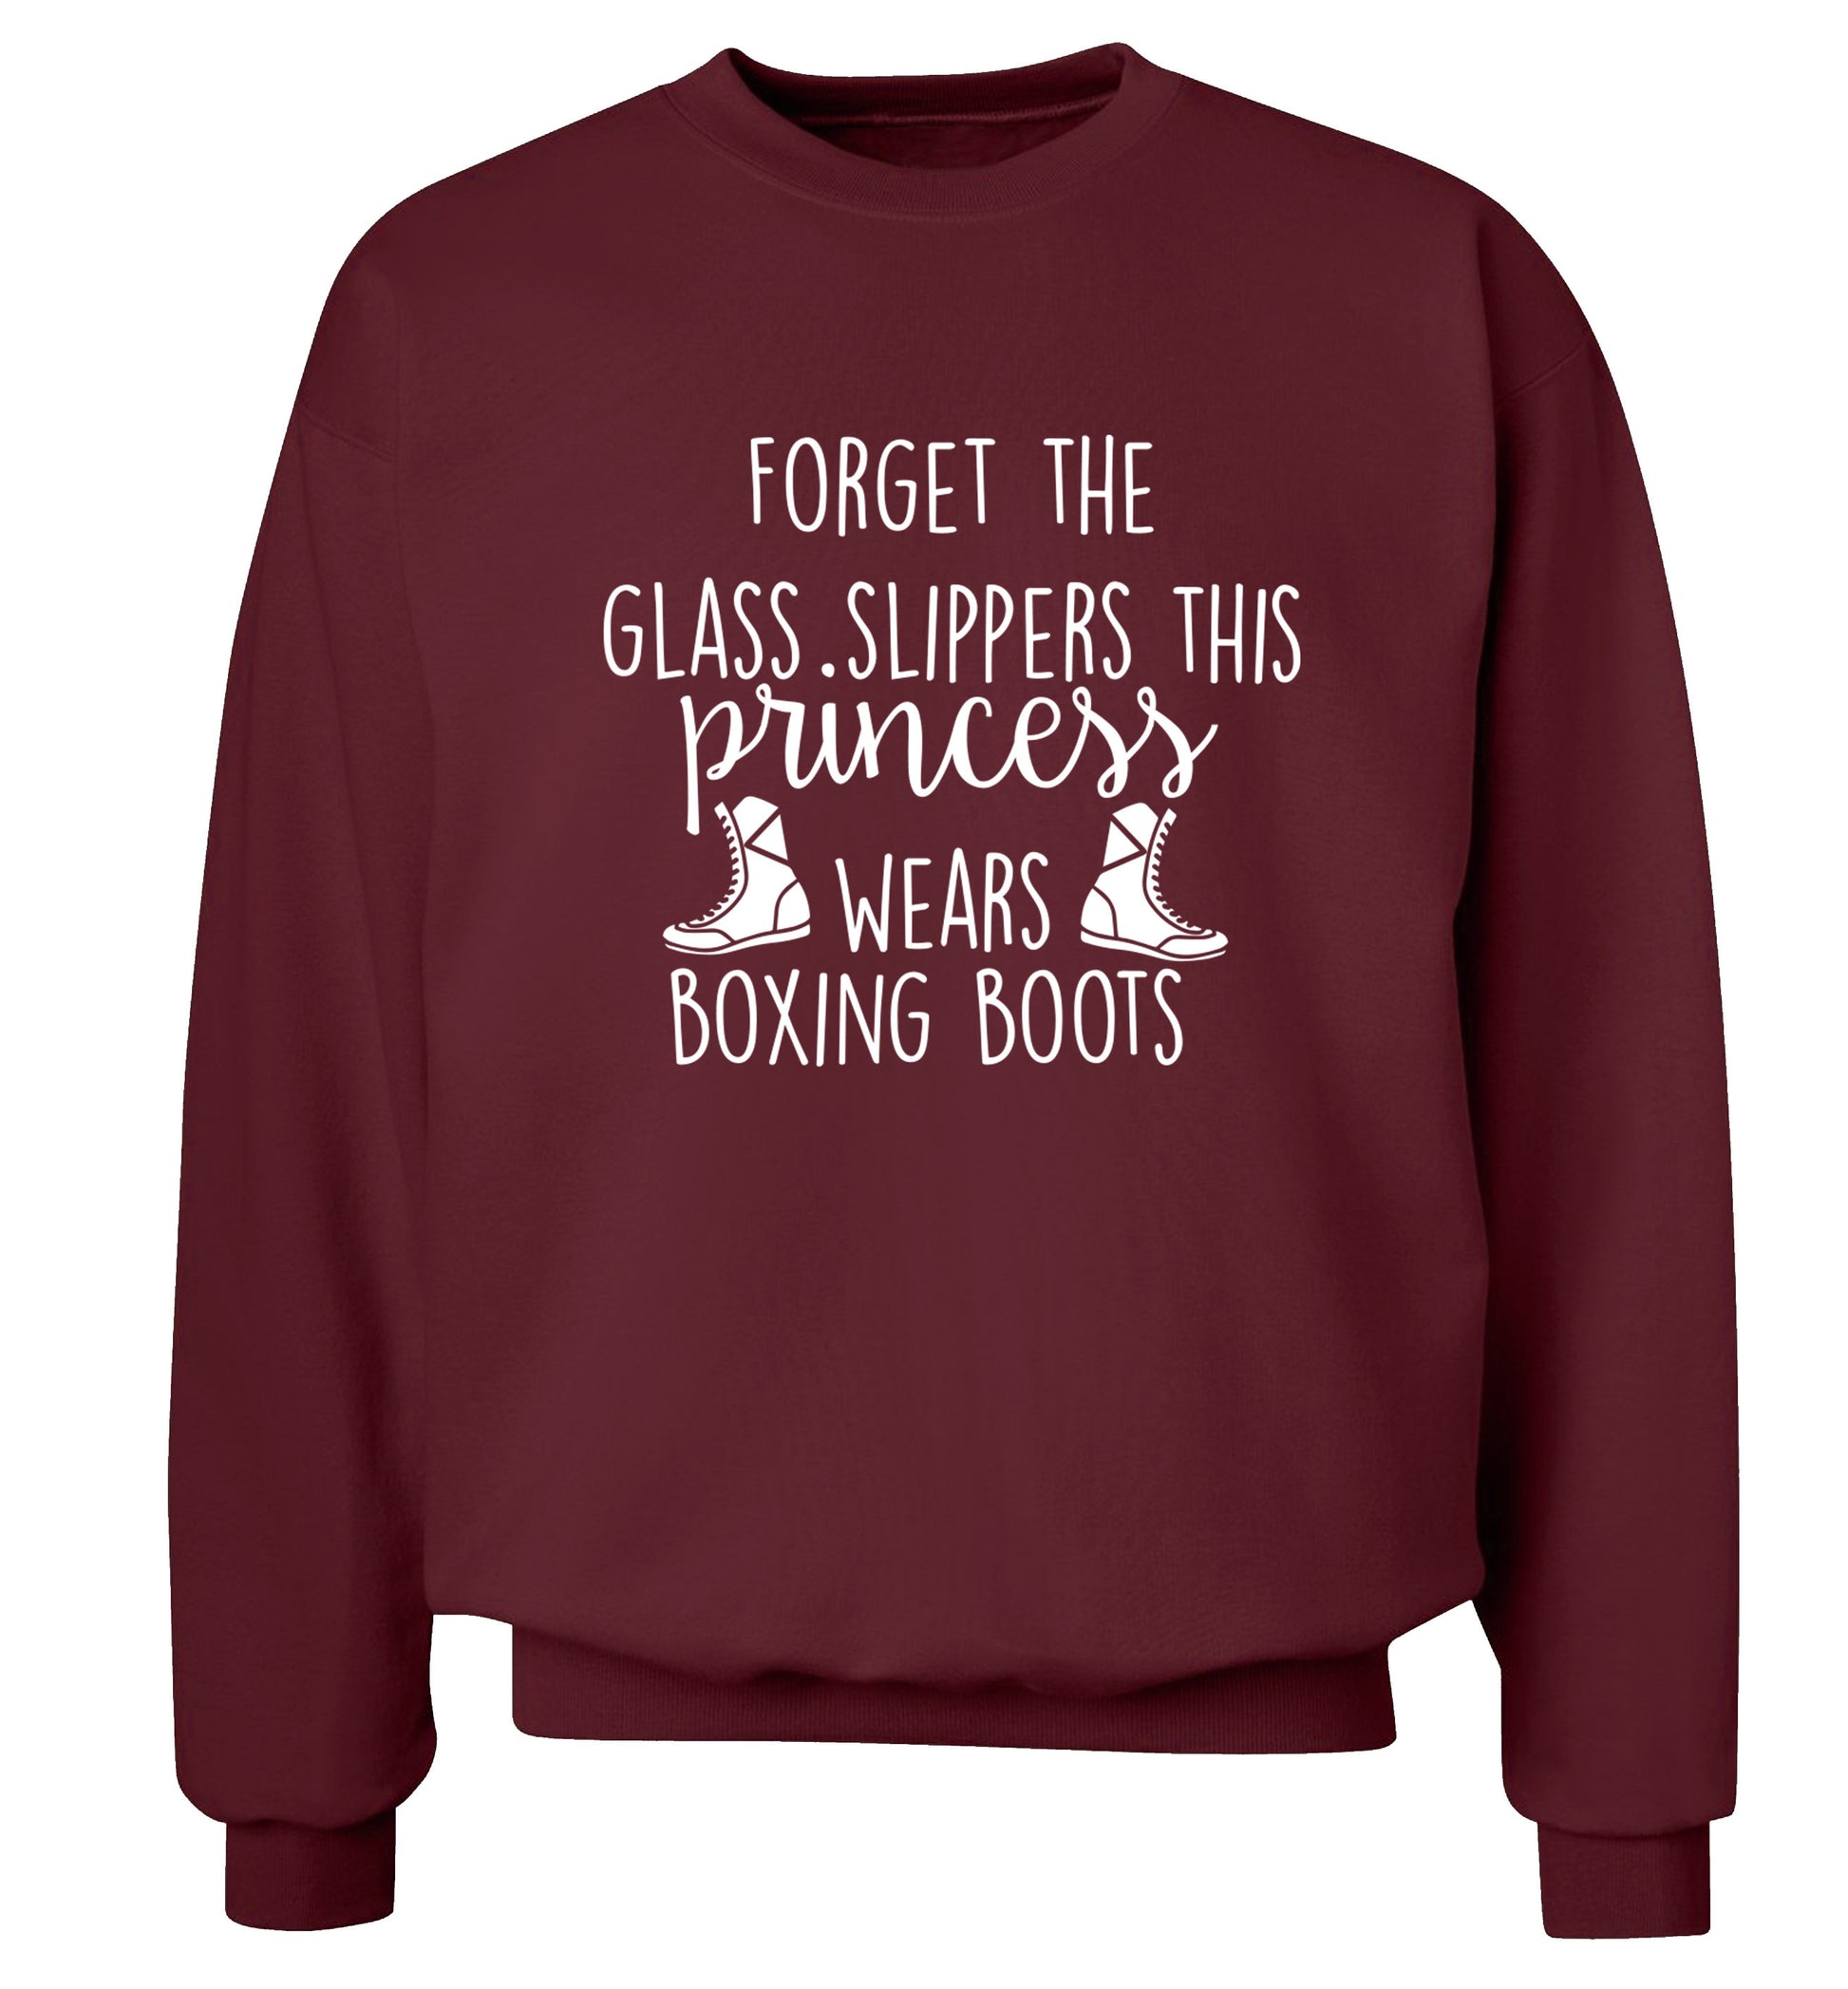 Forget the glass slippers this princess wears boxing boots Adult's unisex maroon Sweater 2XL